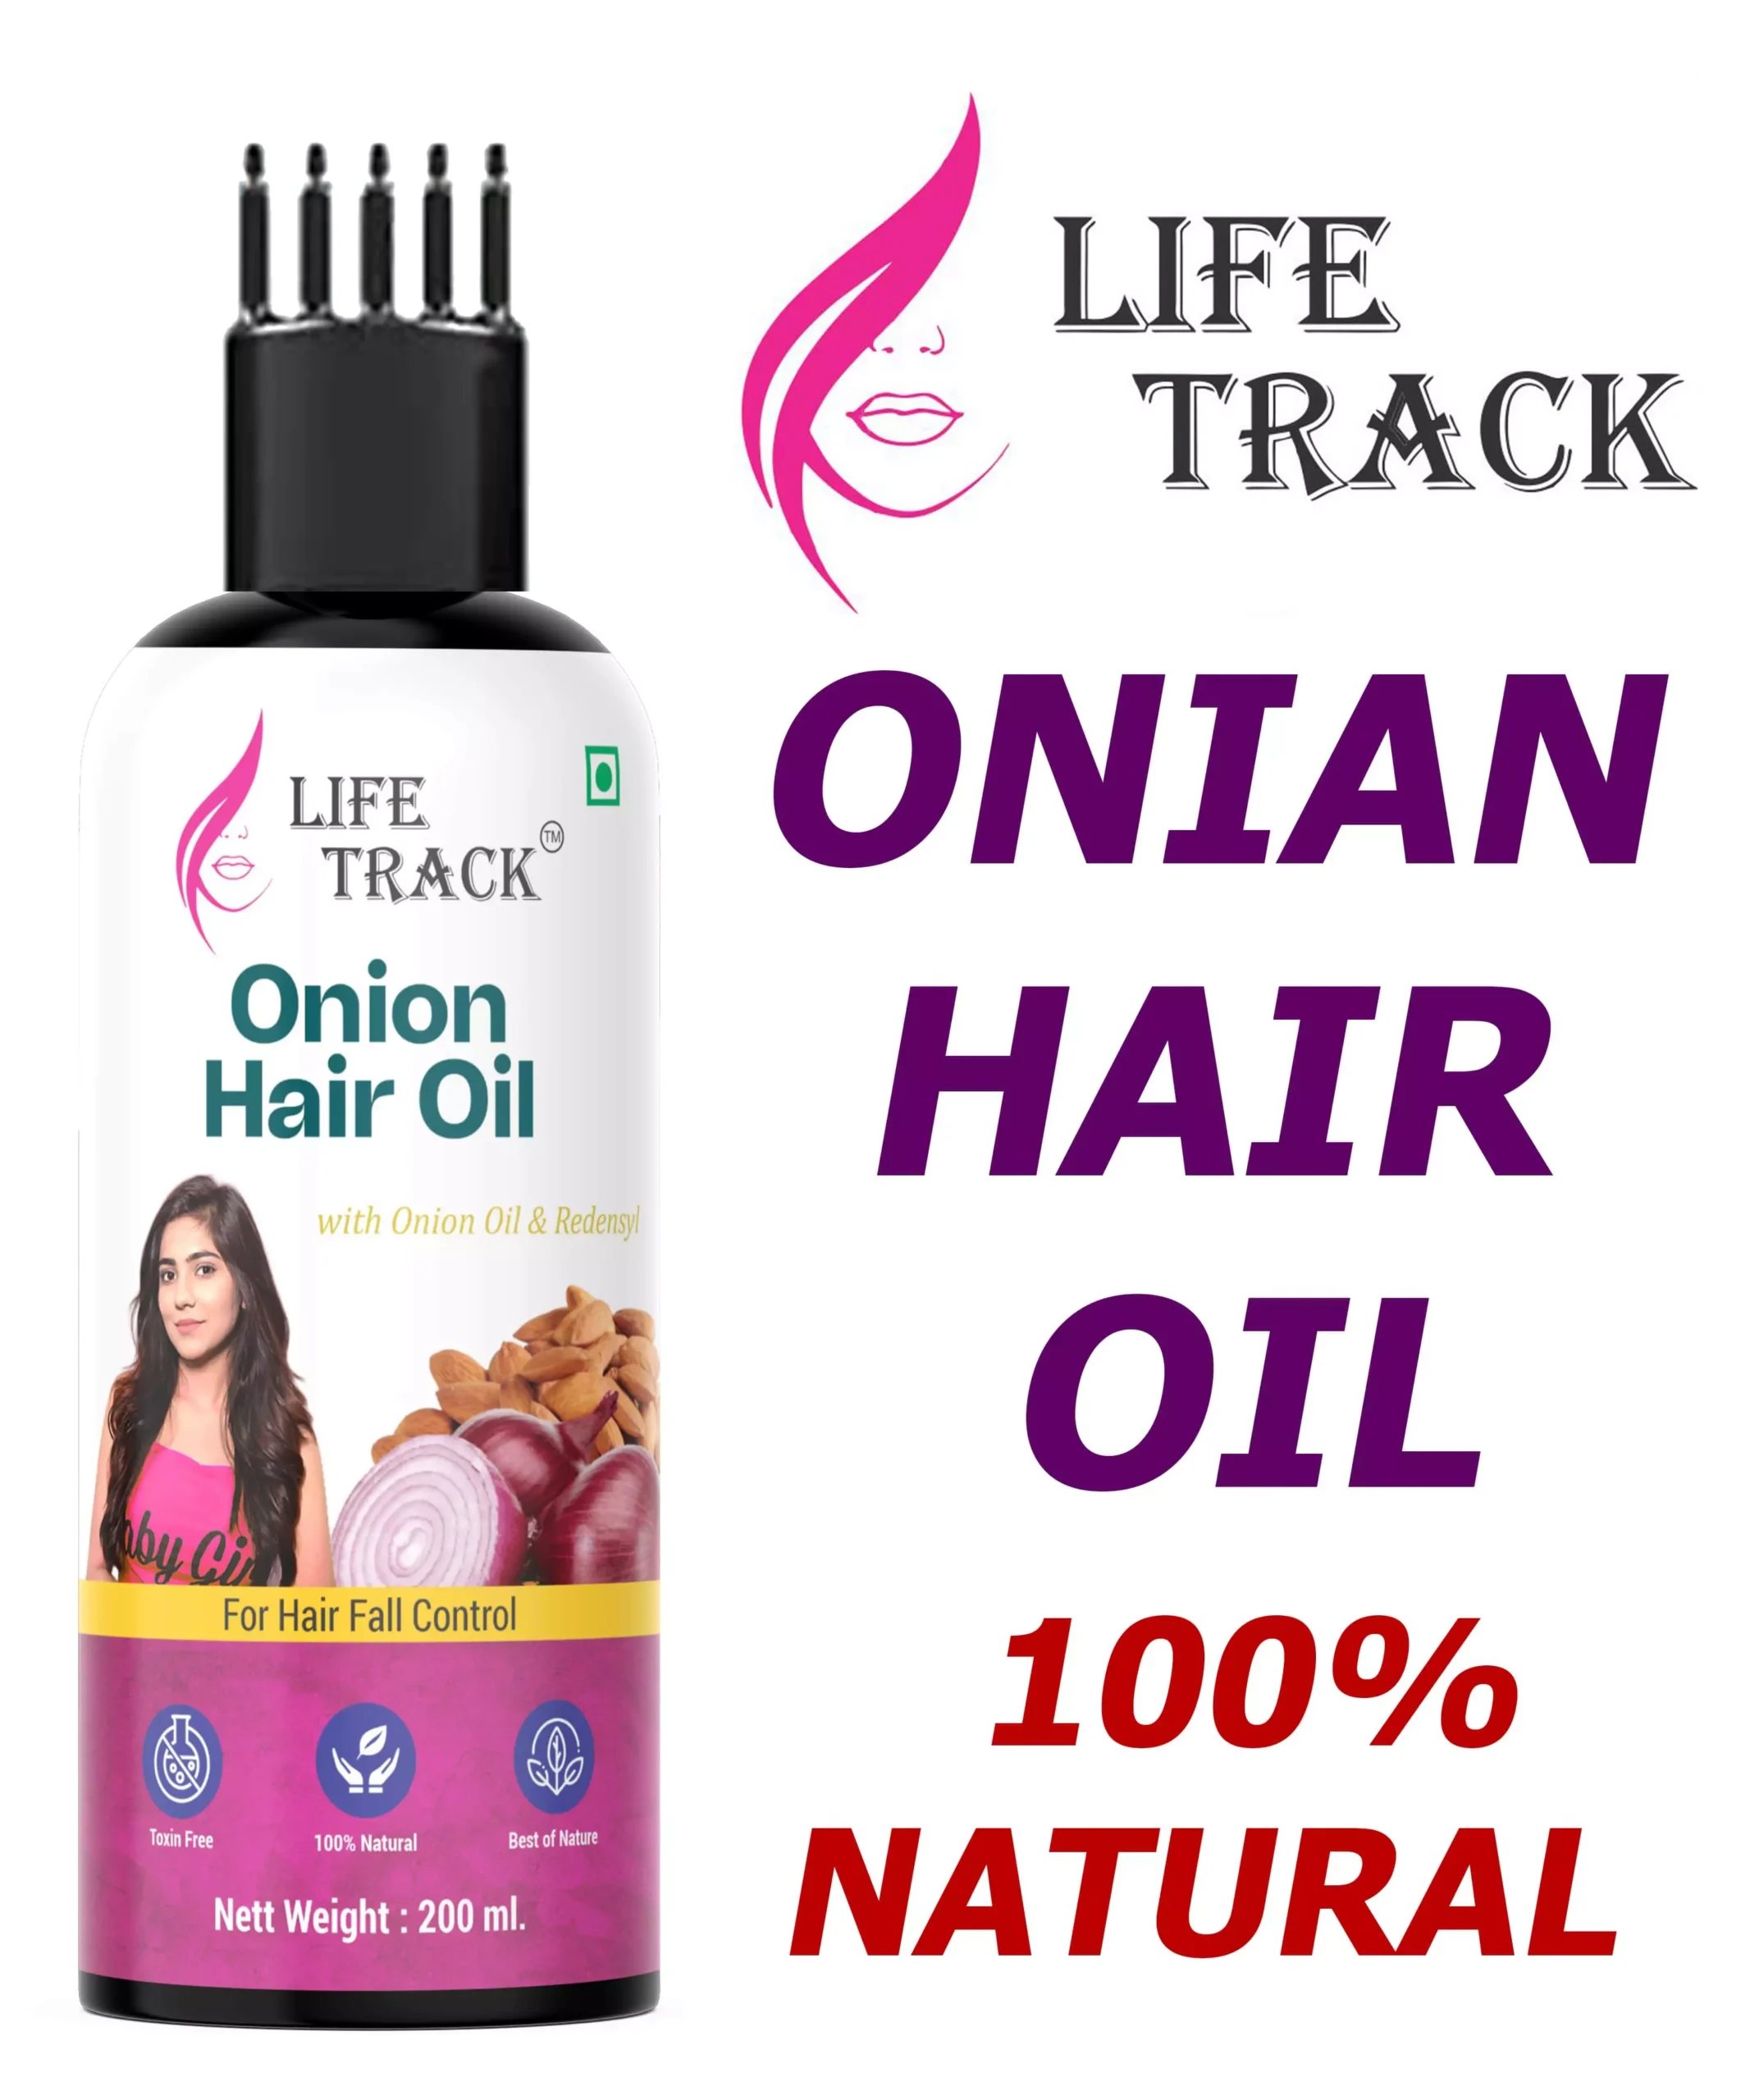 GINT Best Onion Oil & Increase Your Hair Strength and Shine Volume - Gint PK